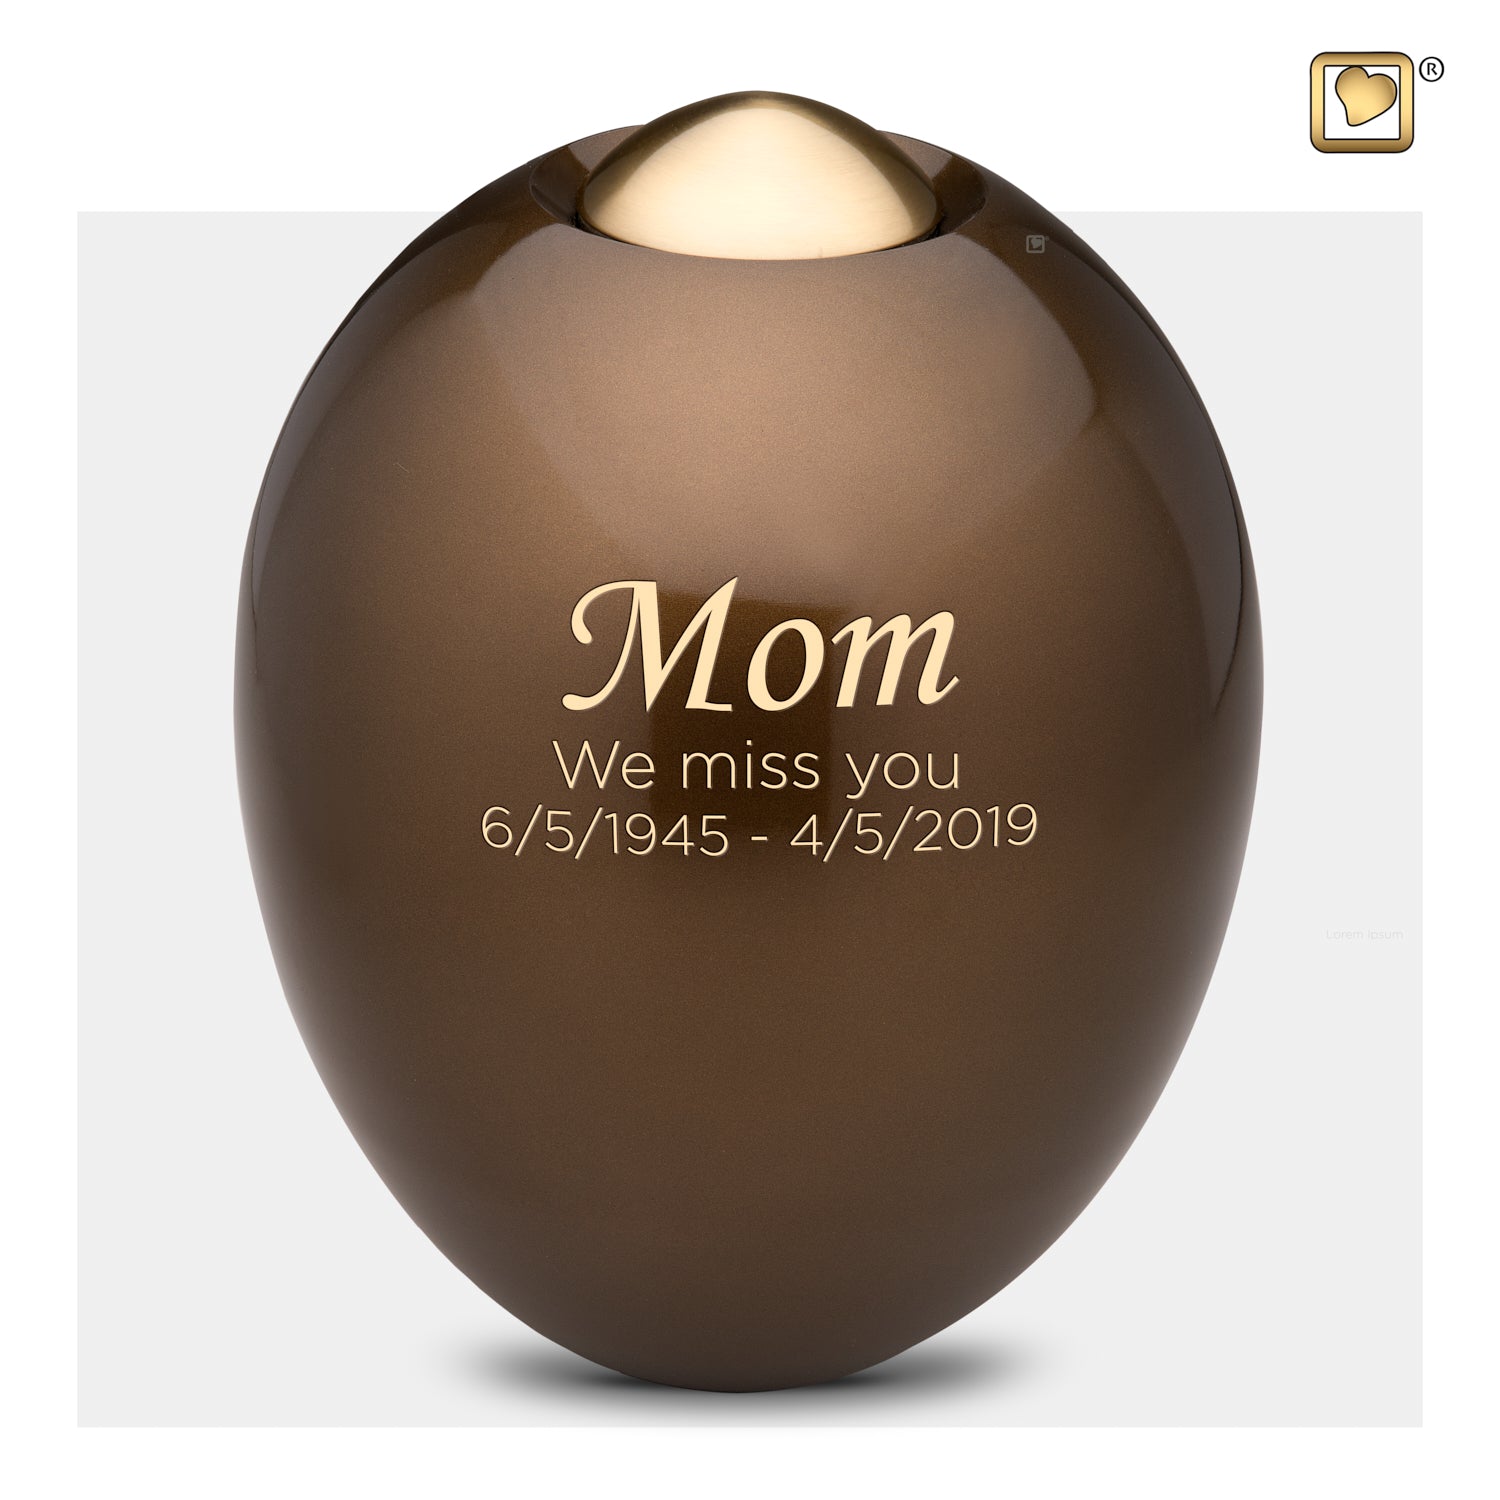 Adult Adore Bronze Colored Cremation Urn with Golden Colored Cap